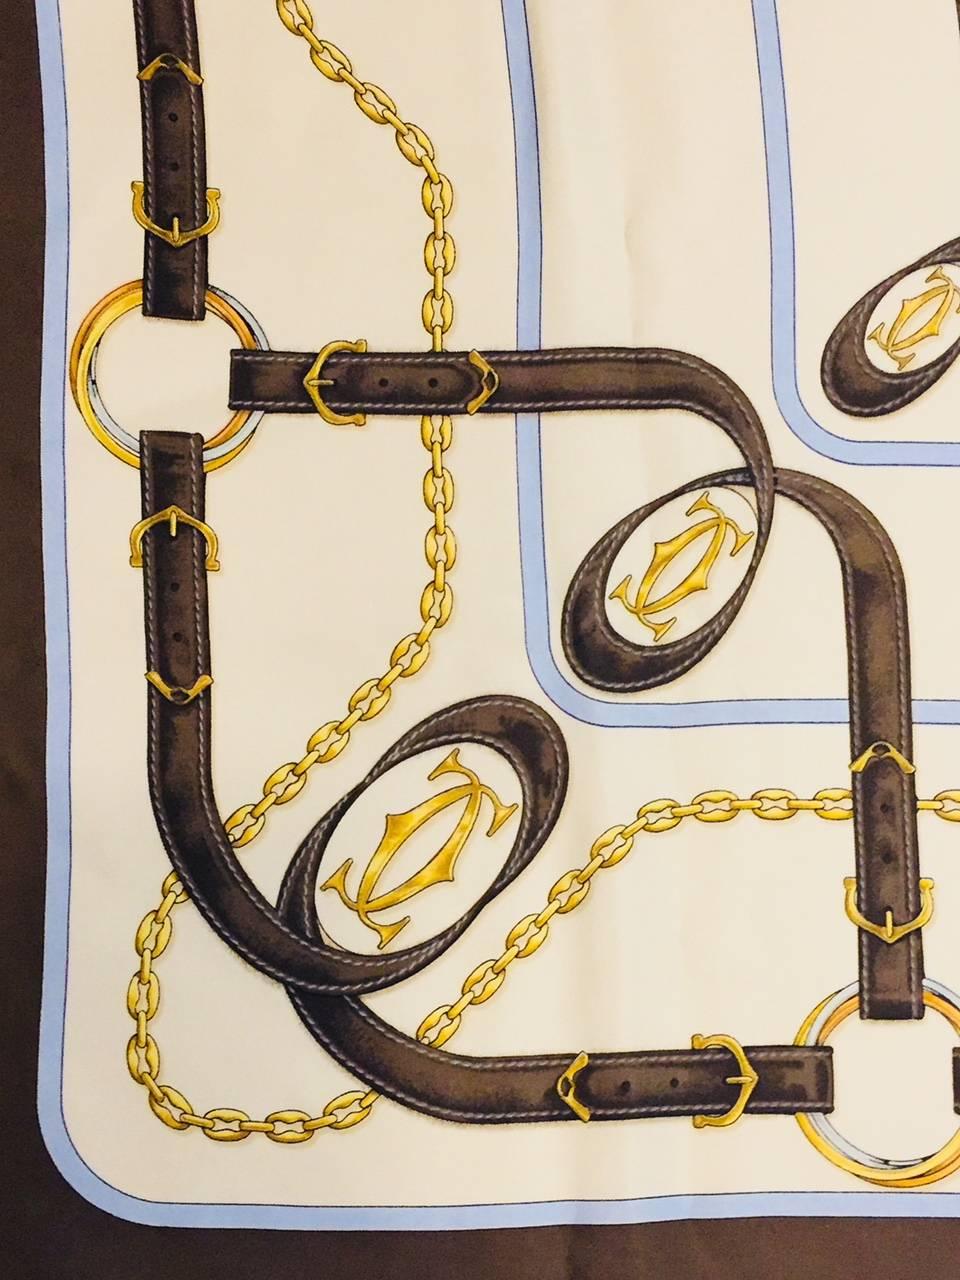 Cartier crafts more than some of the world's most highly desired and admired jewels!  Must de Cartier Chocolate and Ivory Equestrian Motif scarf features brown leather straps and iconic gold tone chains and hardware fit for any grand procession of